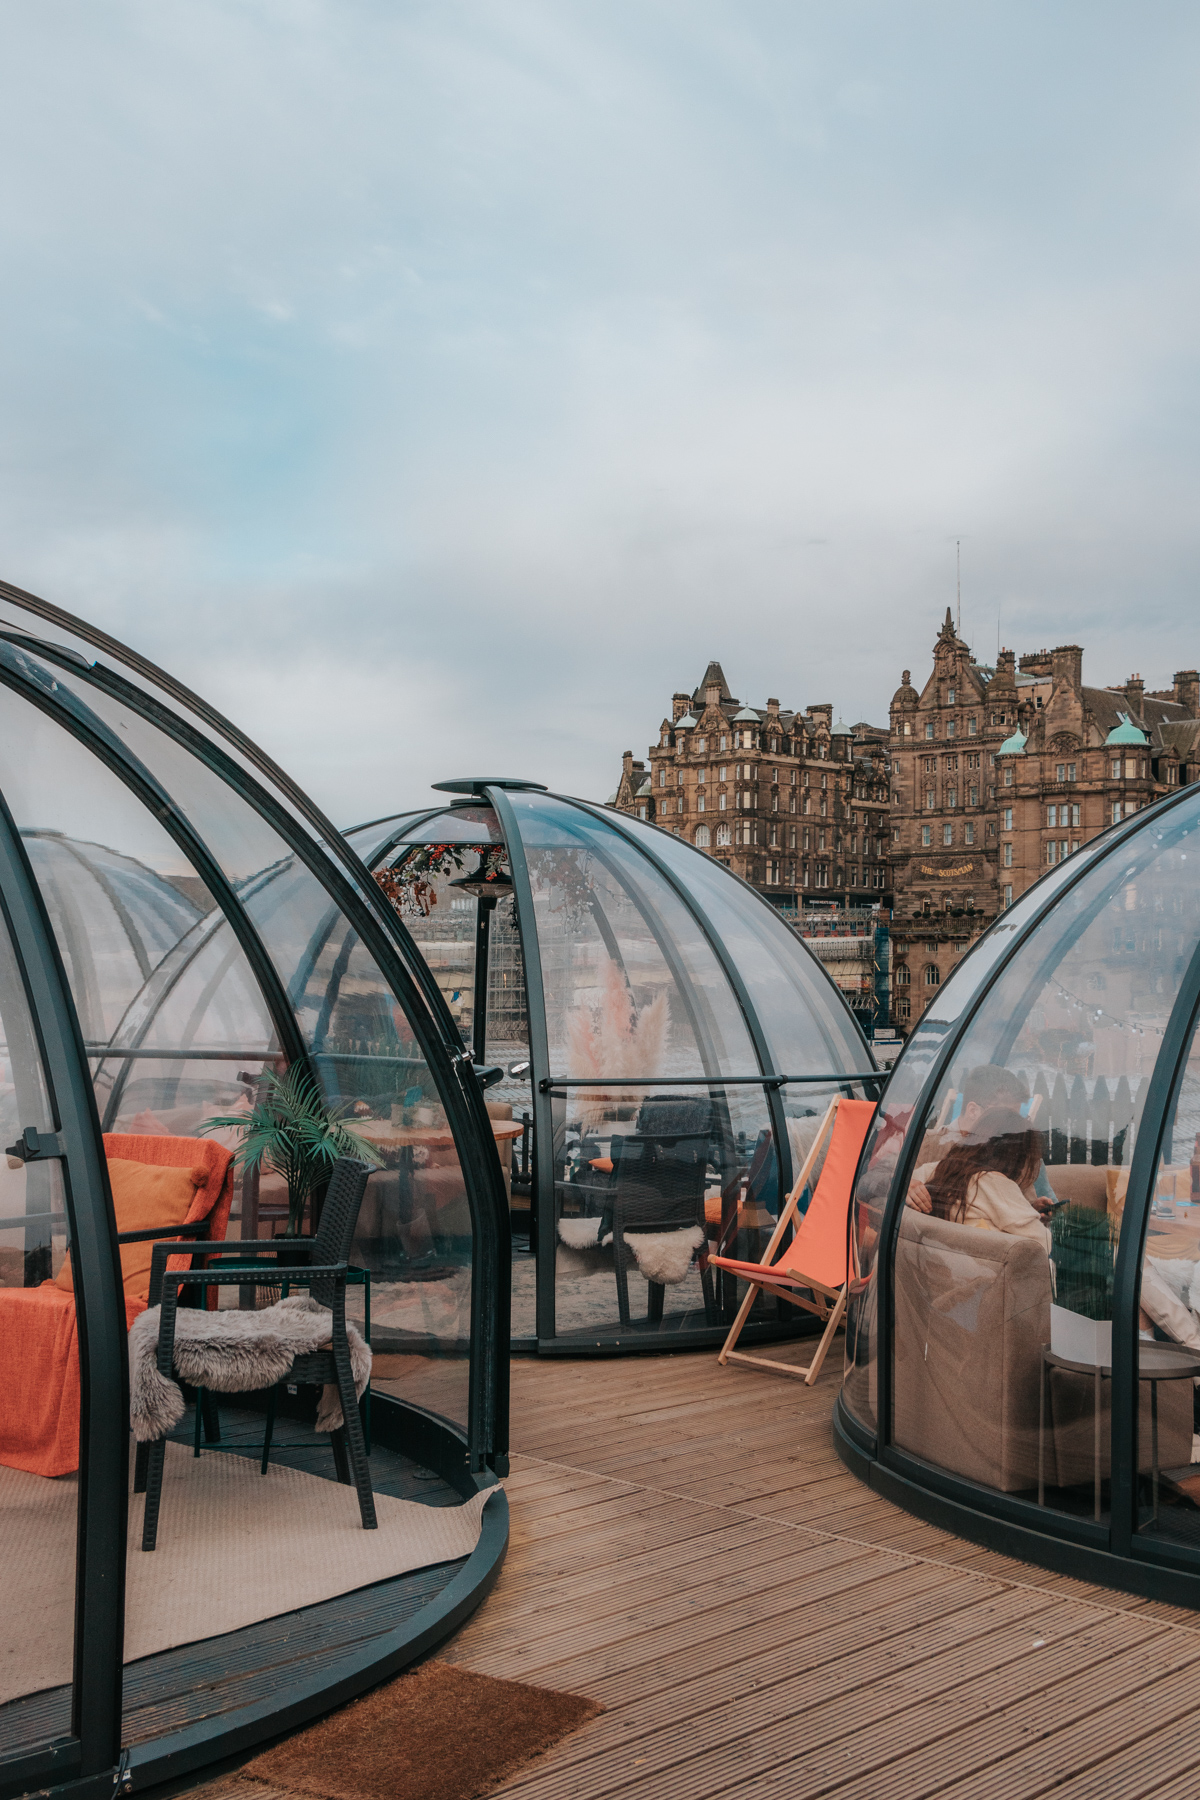 Glass domes made for dining in front of historical city buildings - Cask Smugglers in Edinburgh, Scotland